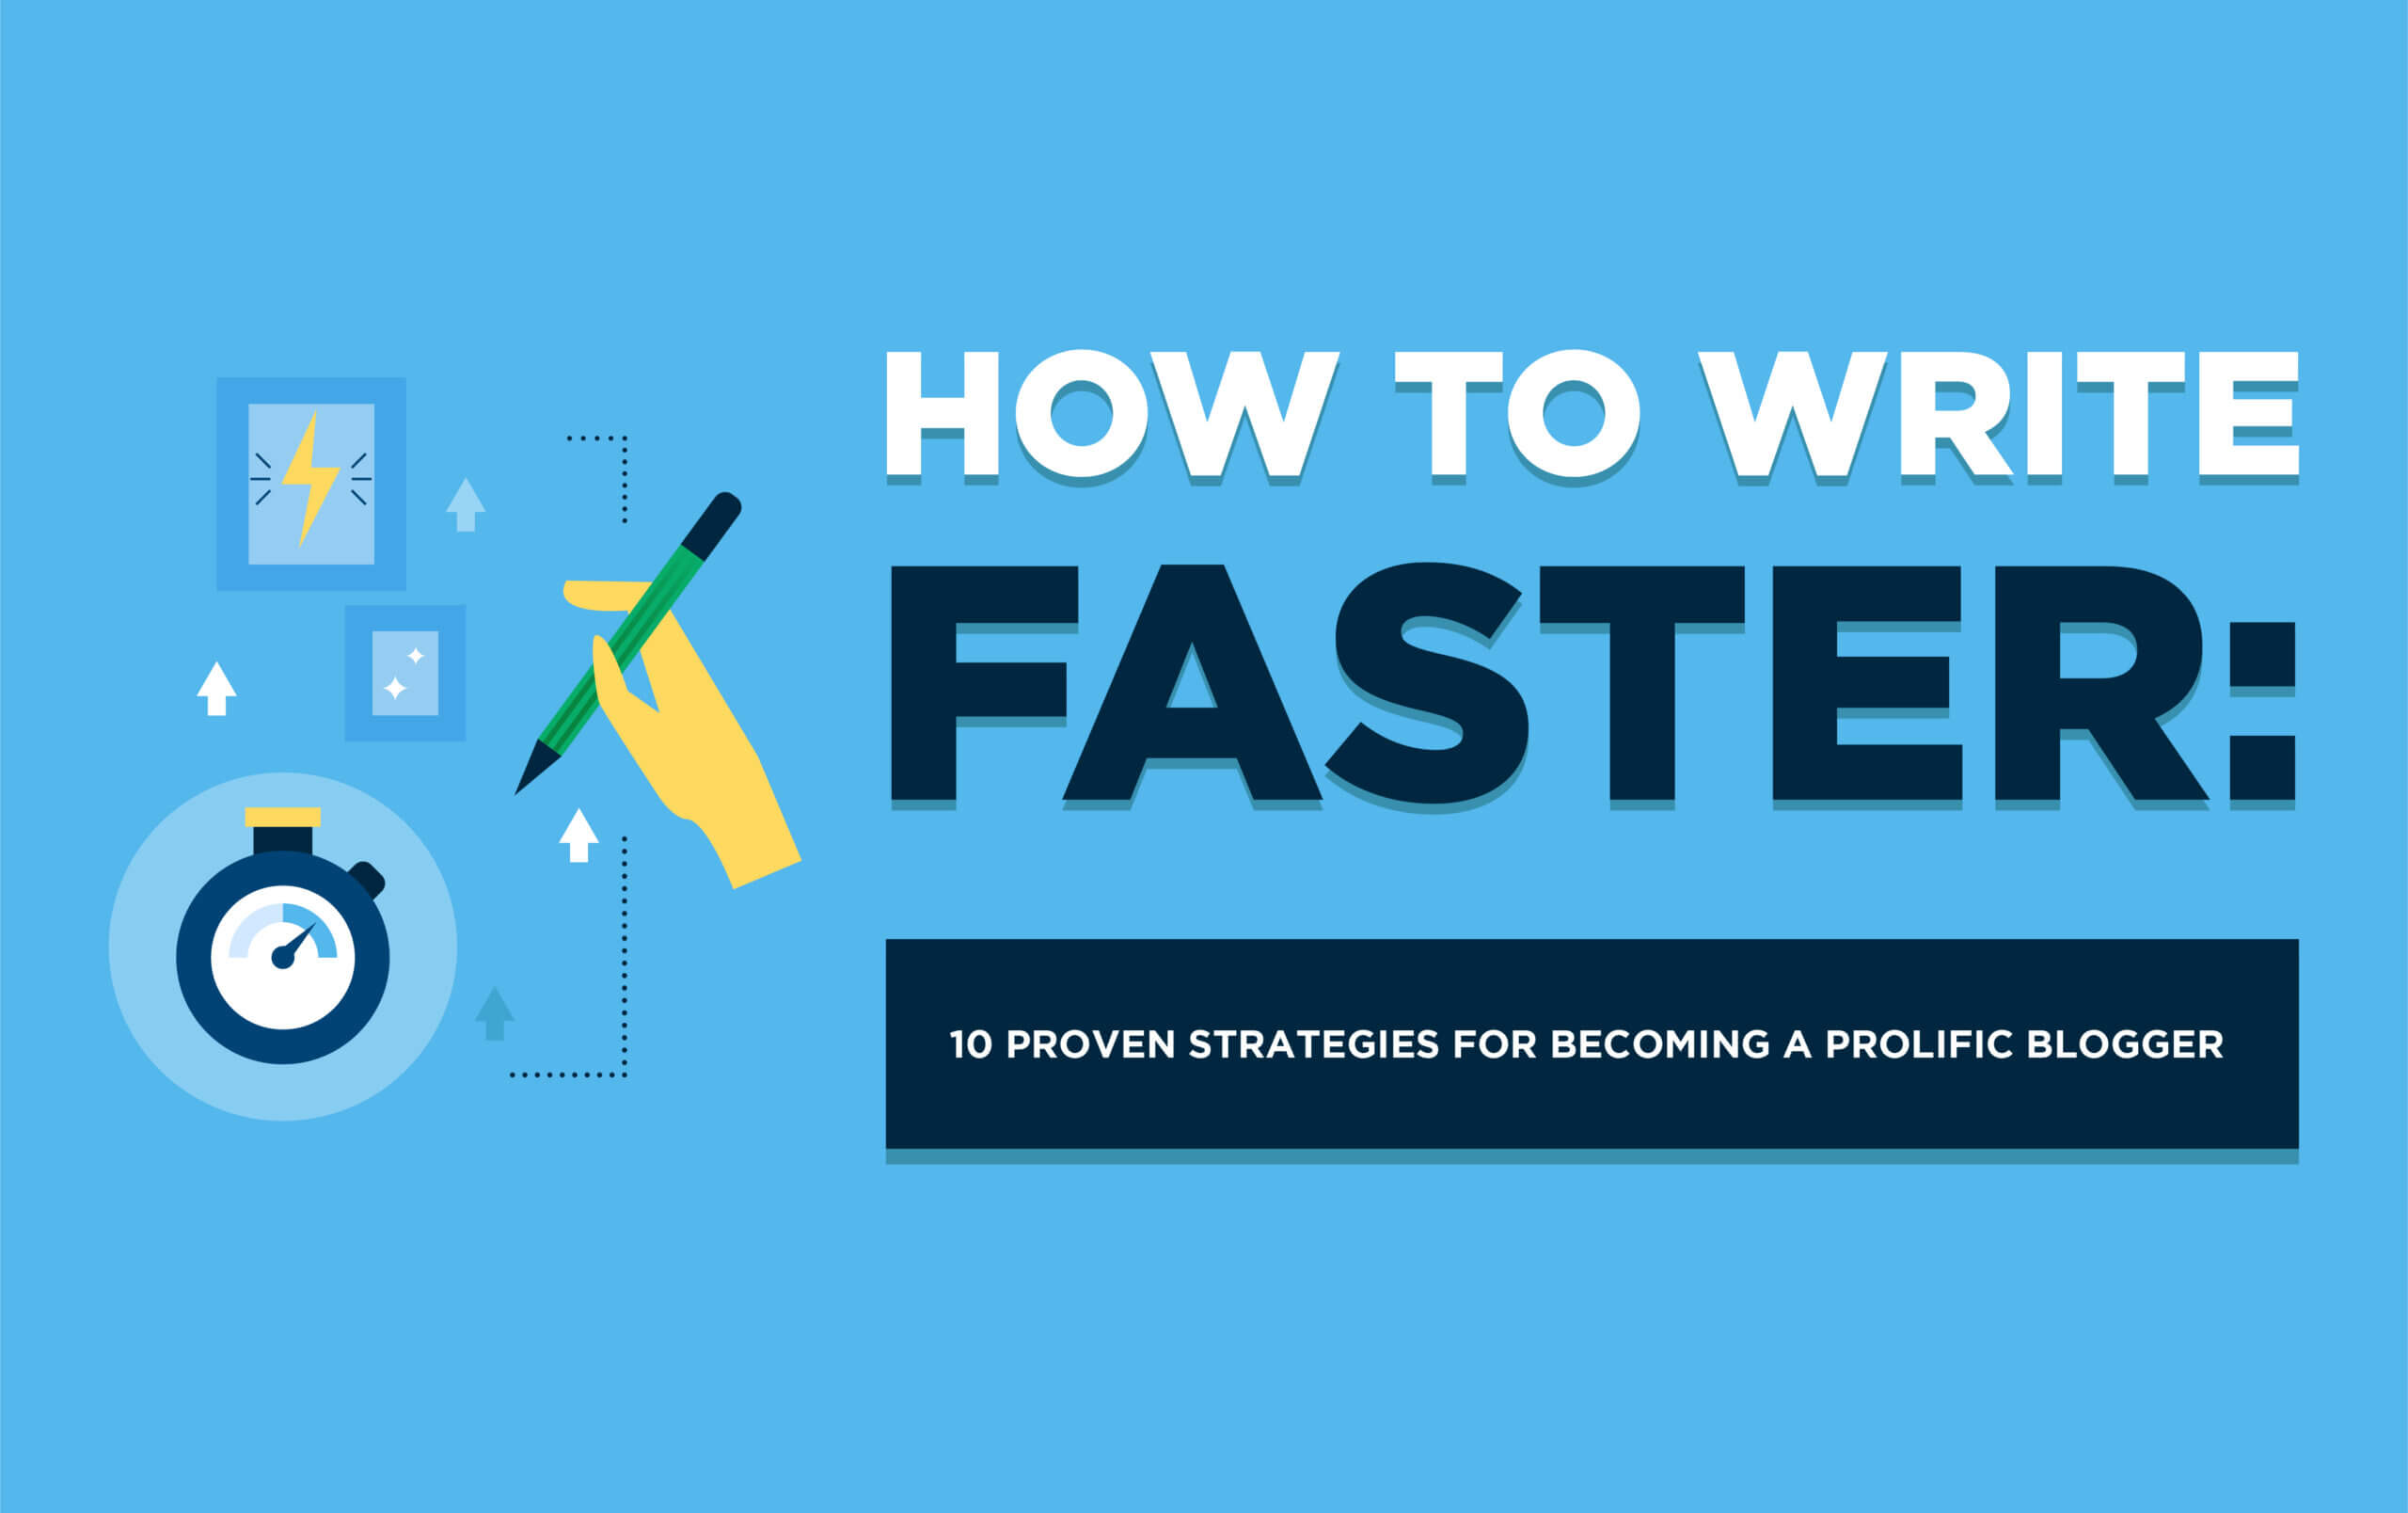 How to Write Faster (10 Tips to Get Over Writer's Block) and Be a Prolific Blogger